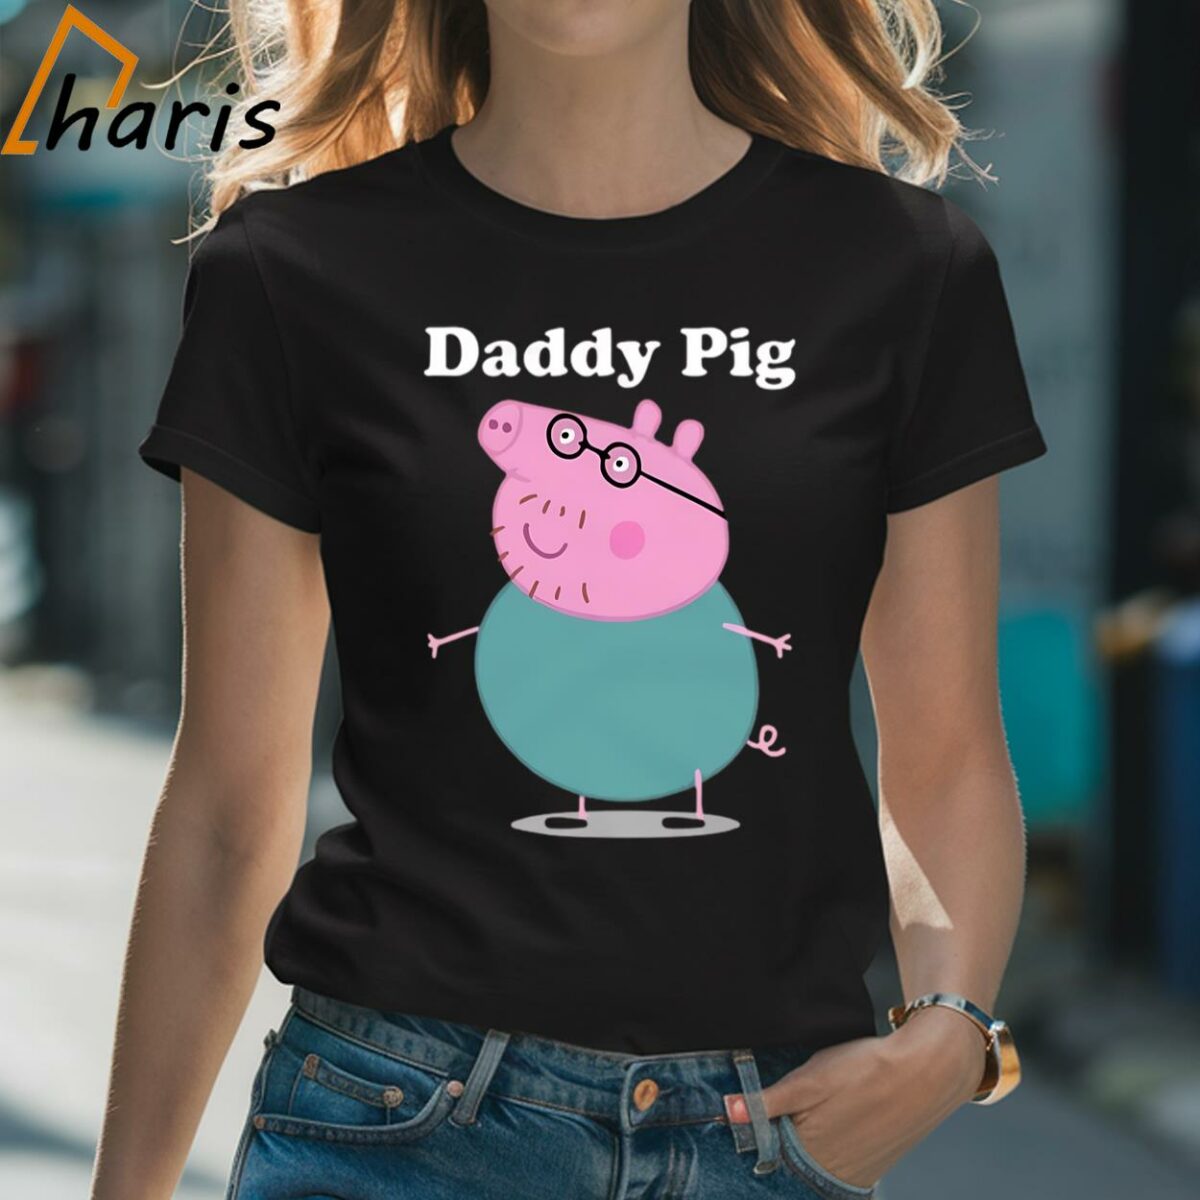 Daddy Pig Mens Tee Shirt Gift For Daddy 2 Shirt